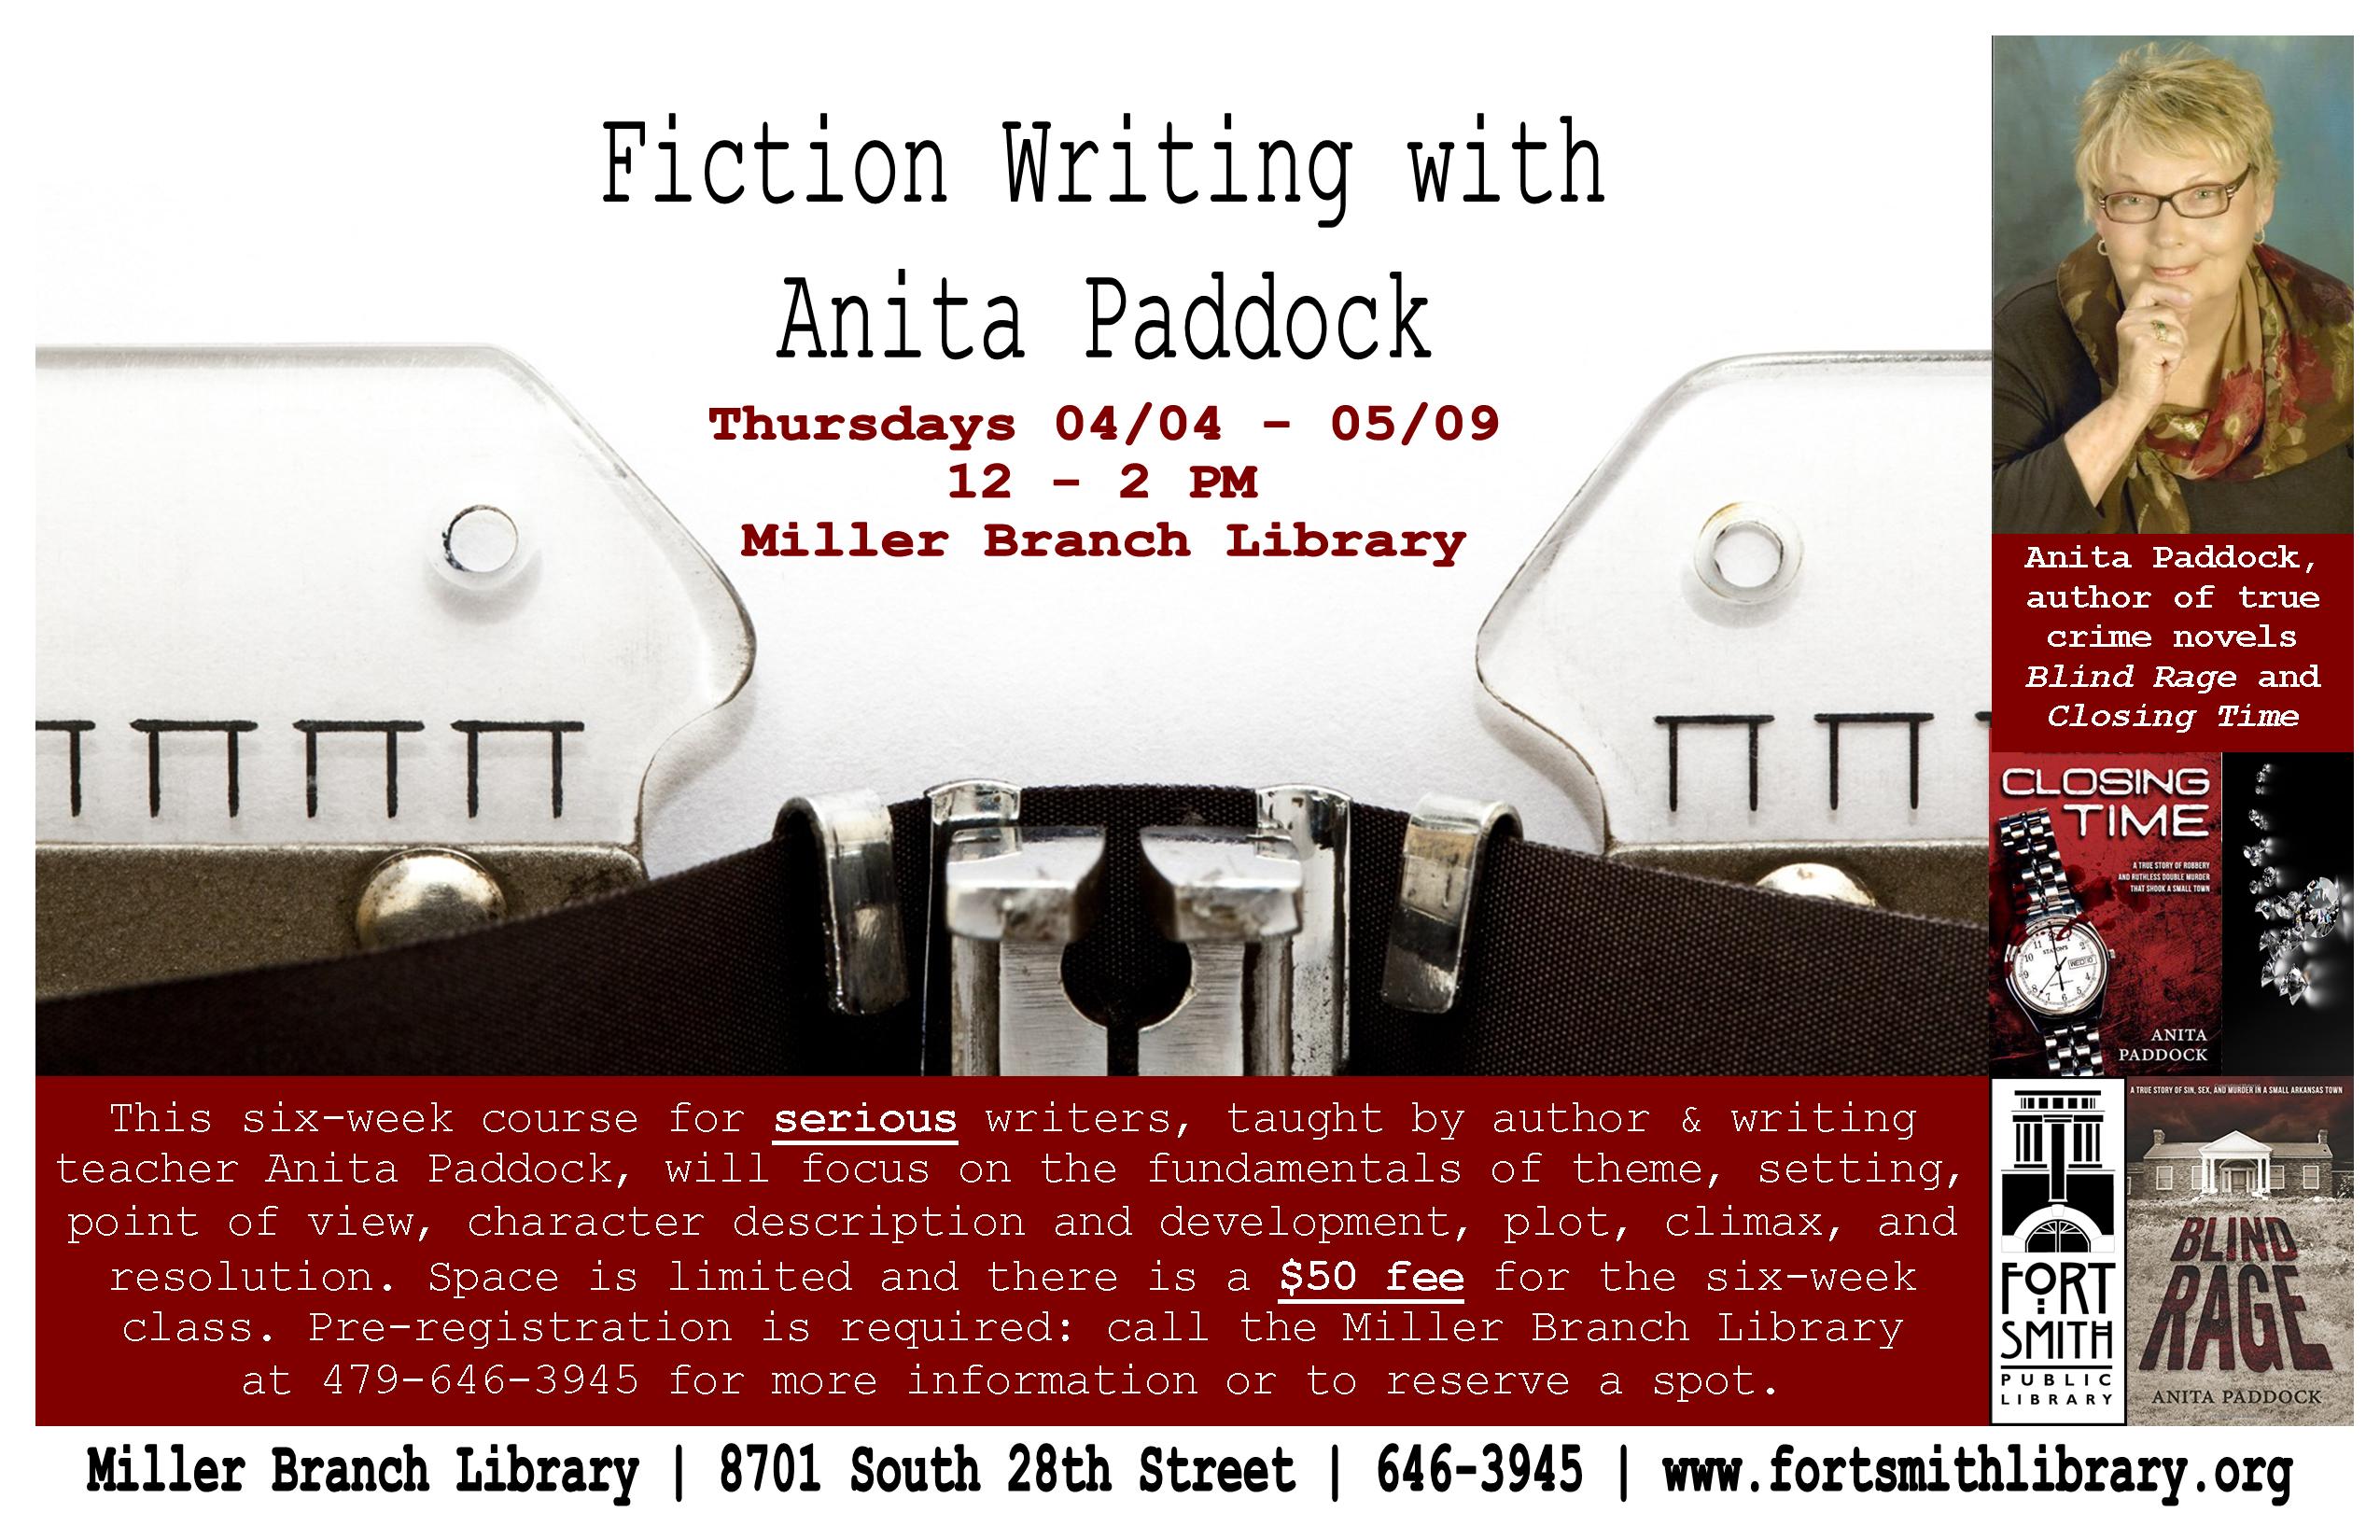 poster for fiction writing class